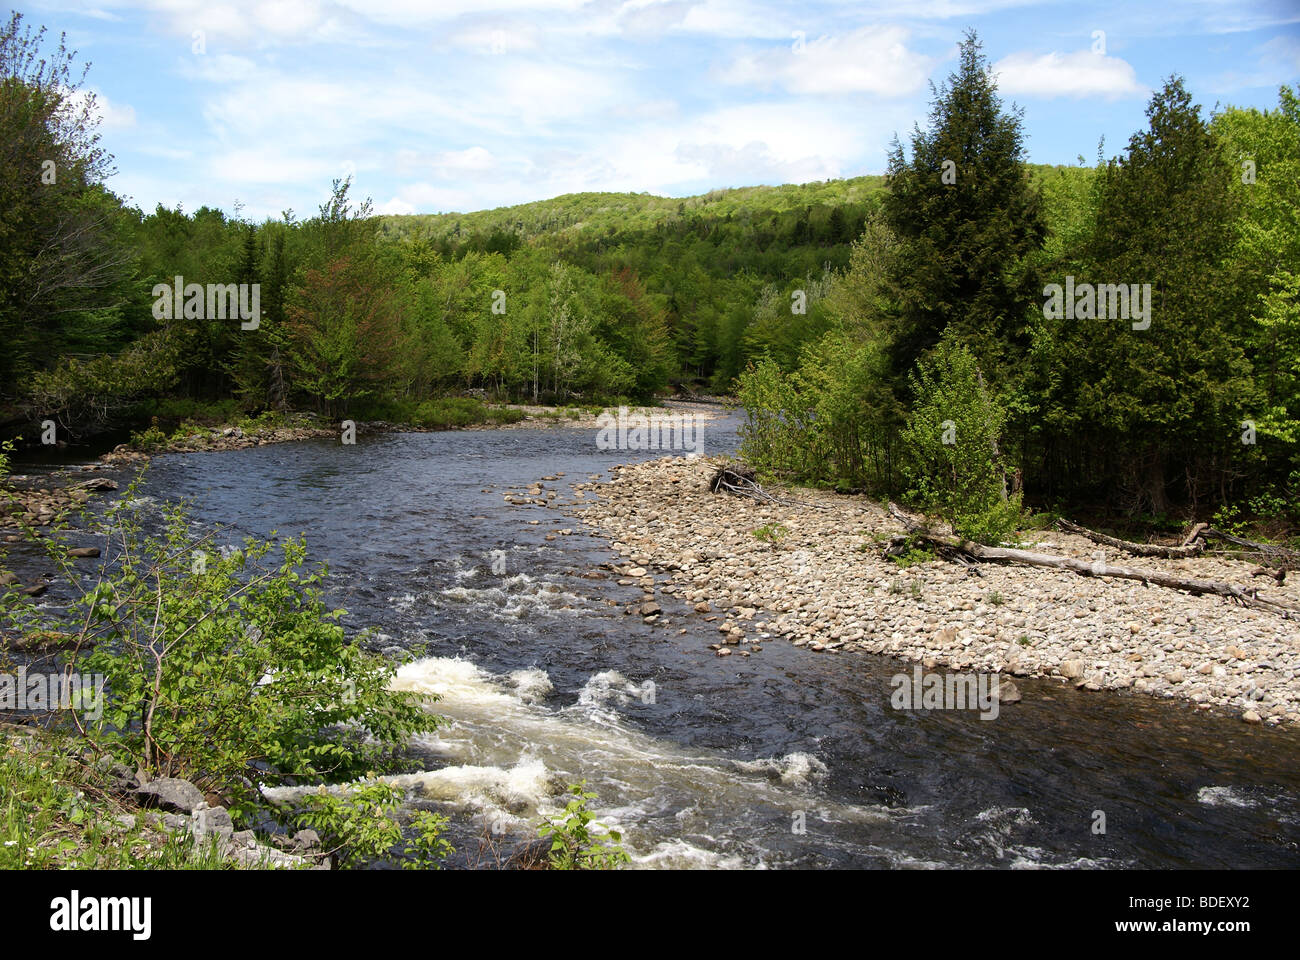 Pristine nature  around a river surrounded by woods Stock Photo